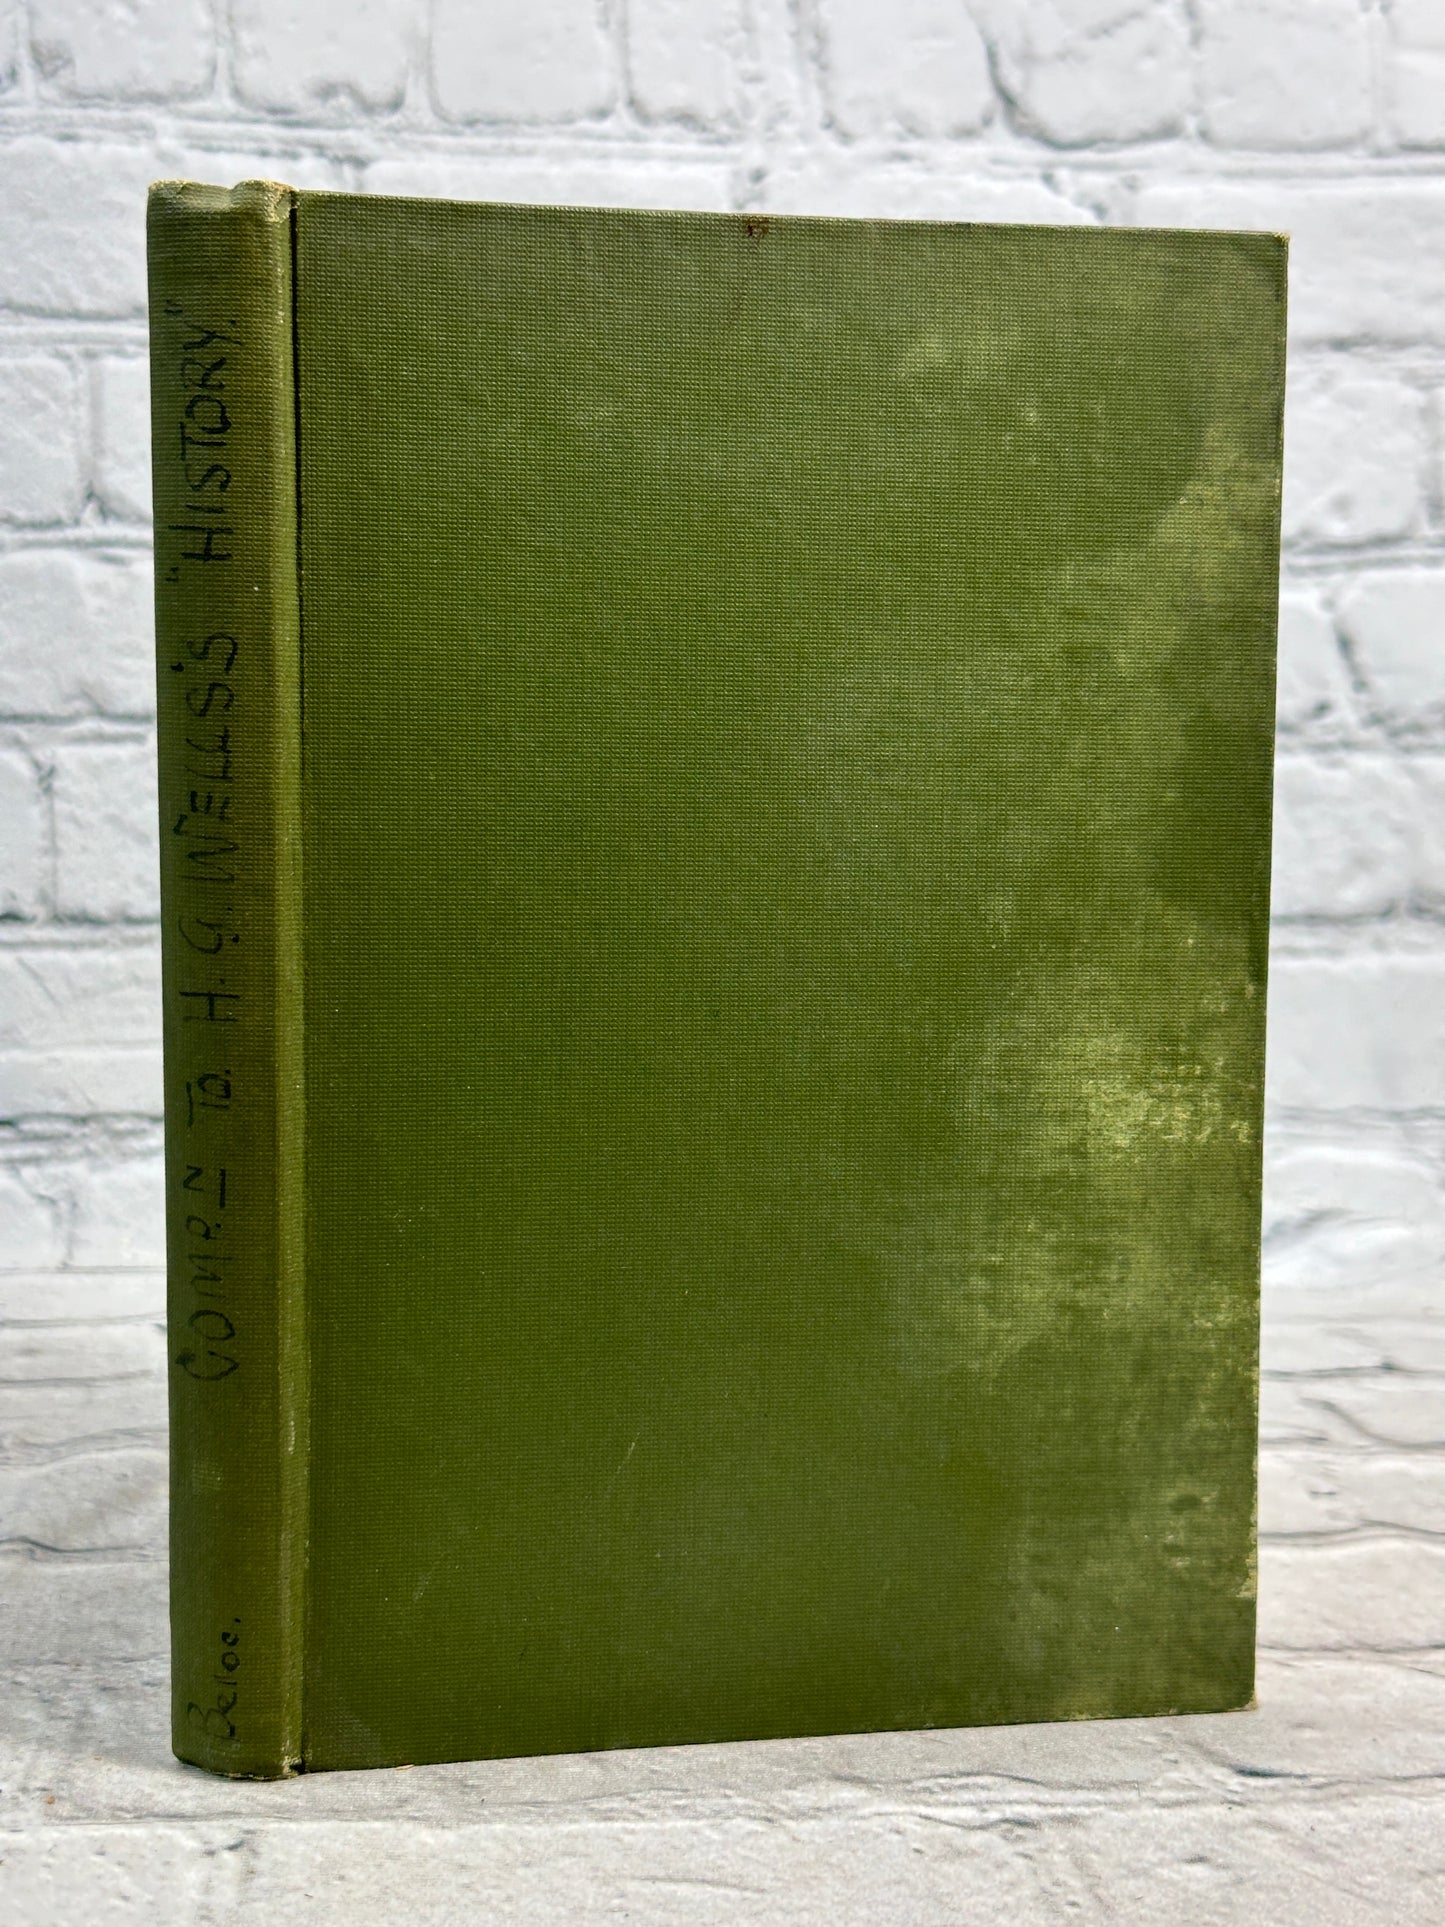 A Companion to Mr. Wells's Outline of History by Hilaire Belloc [1929]